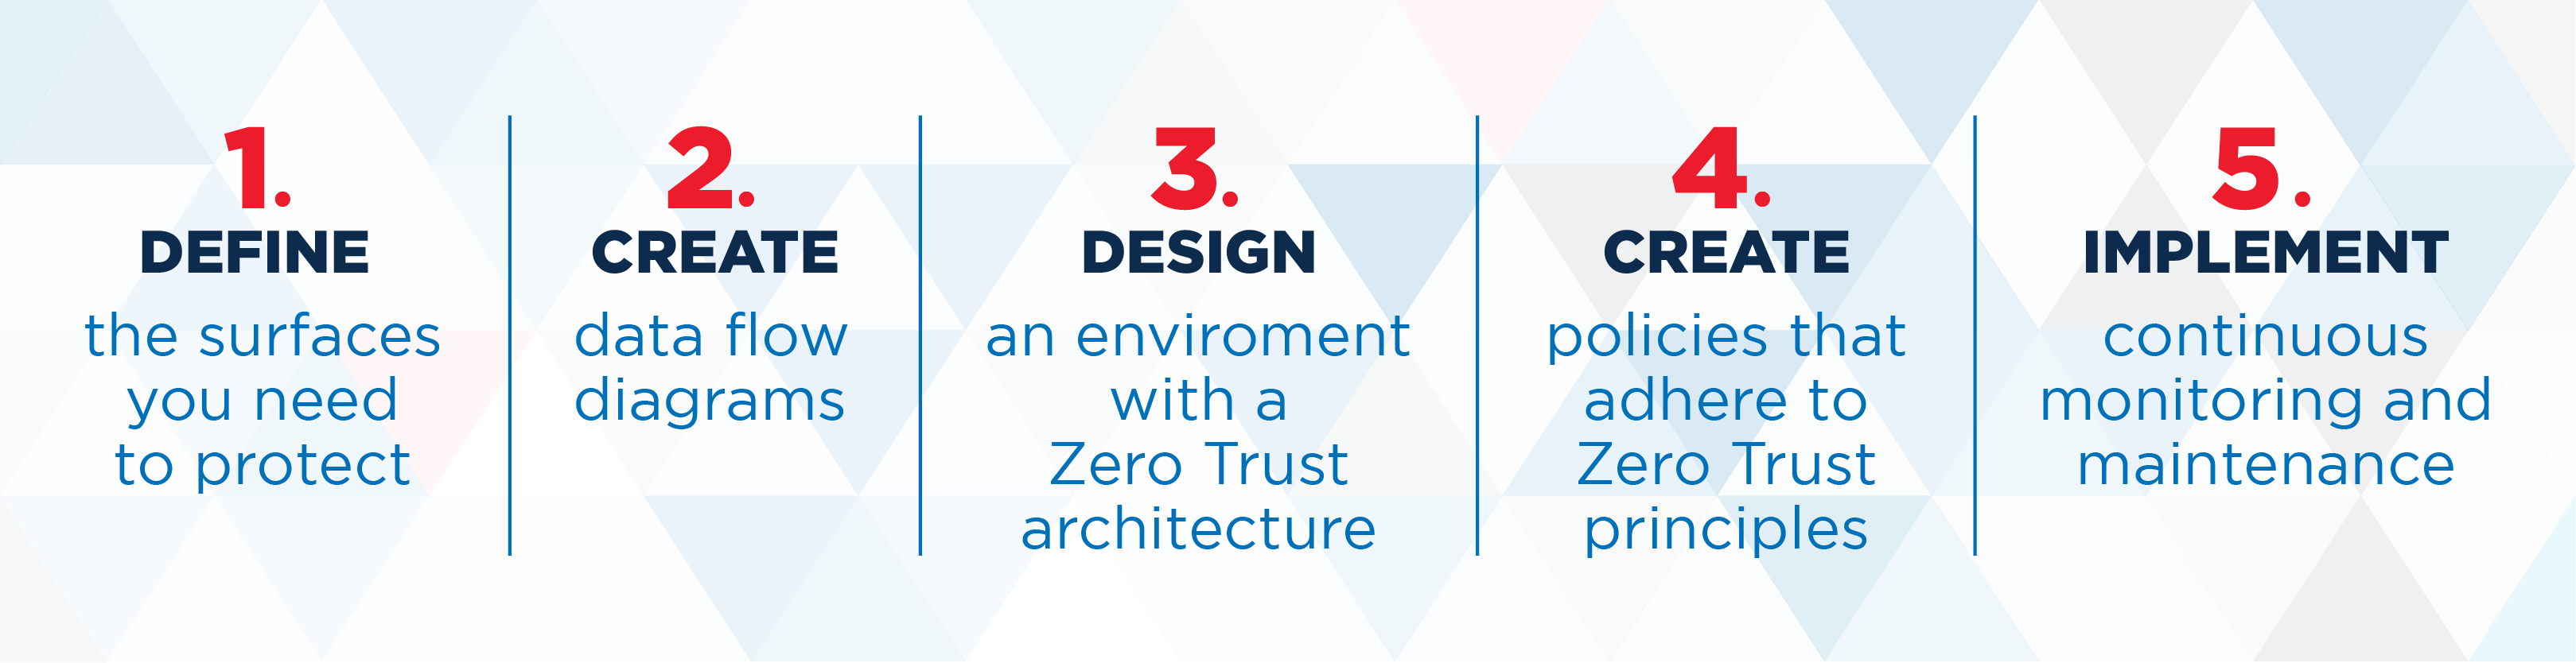 Define the surfaces you need to protect. Create data flow diagrams. Design and environment with a Zero Trust architecture. Create policies that adhere to Zero Trust principles. Implement continuous monitoring and maintenance.